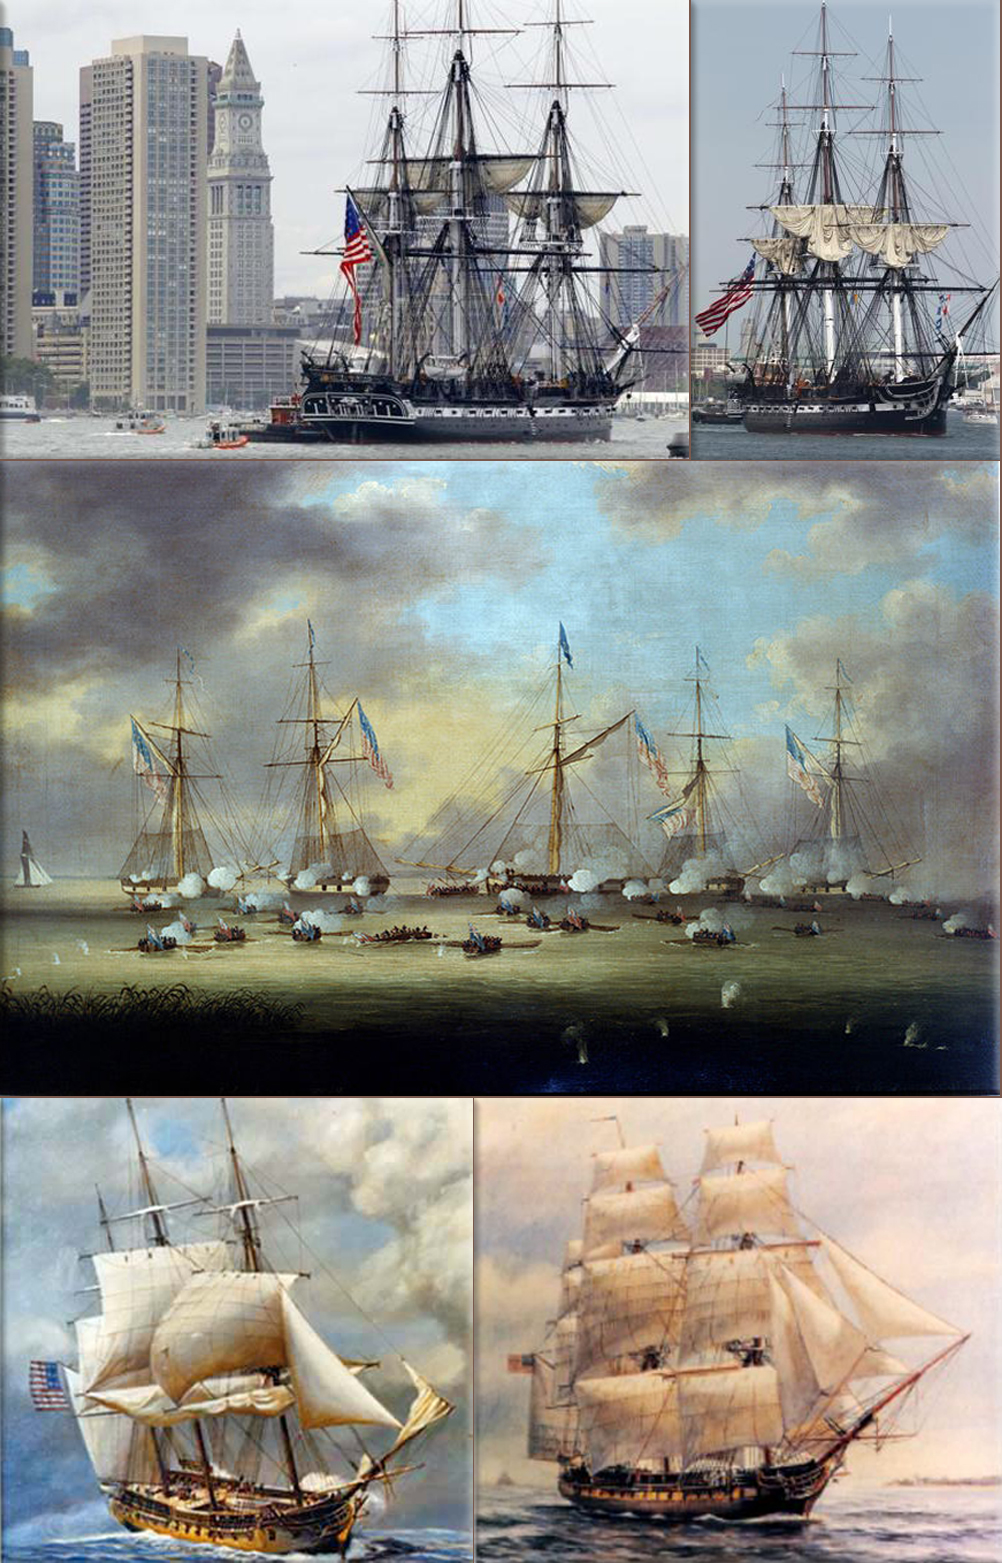 The United States Government establishes a permanent navy and authorizes the building of six frigates on March 27th, 1794